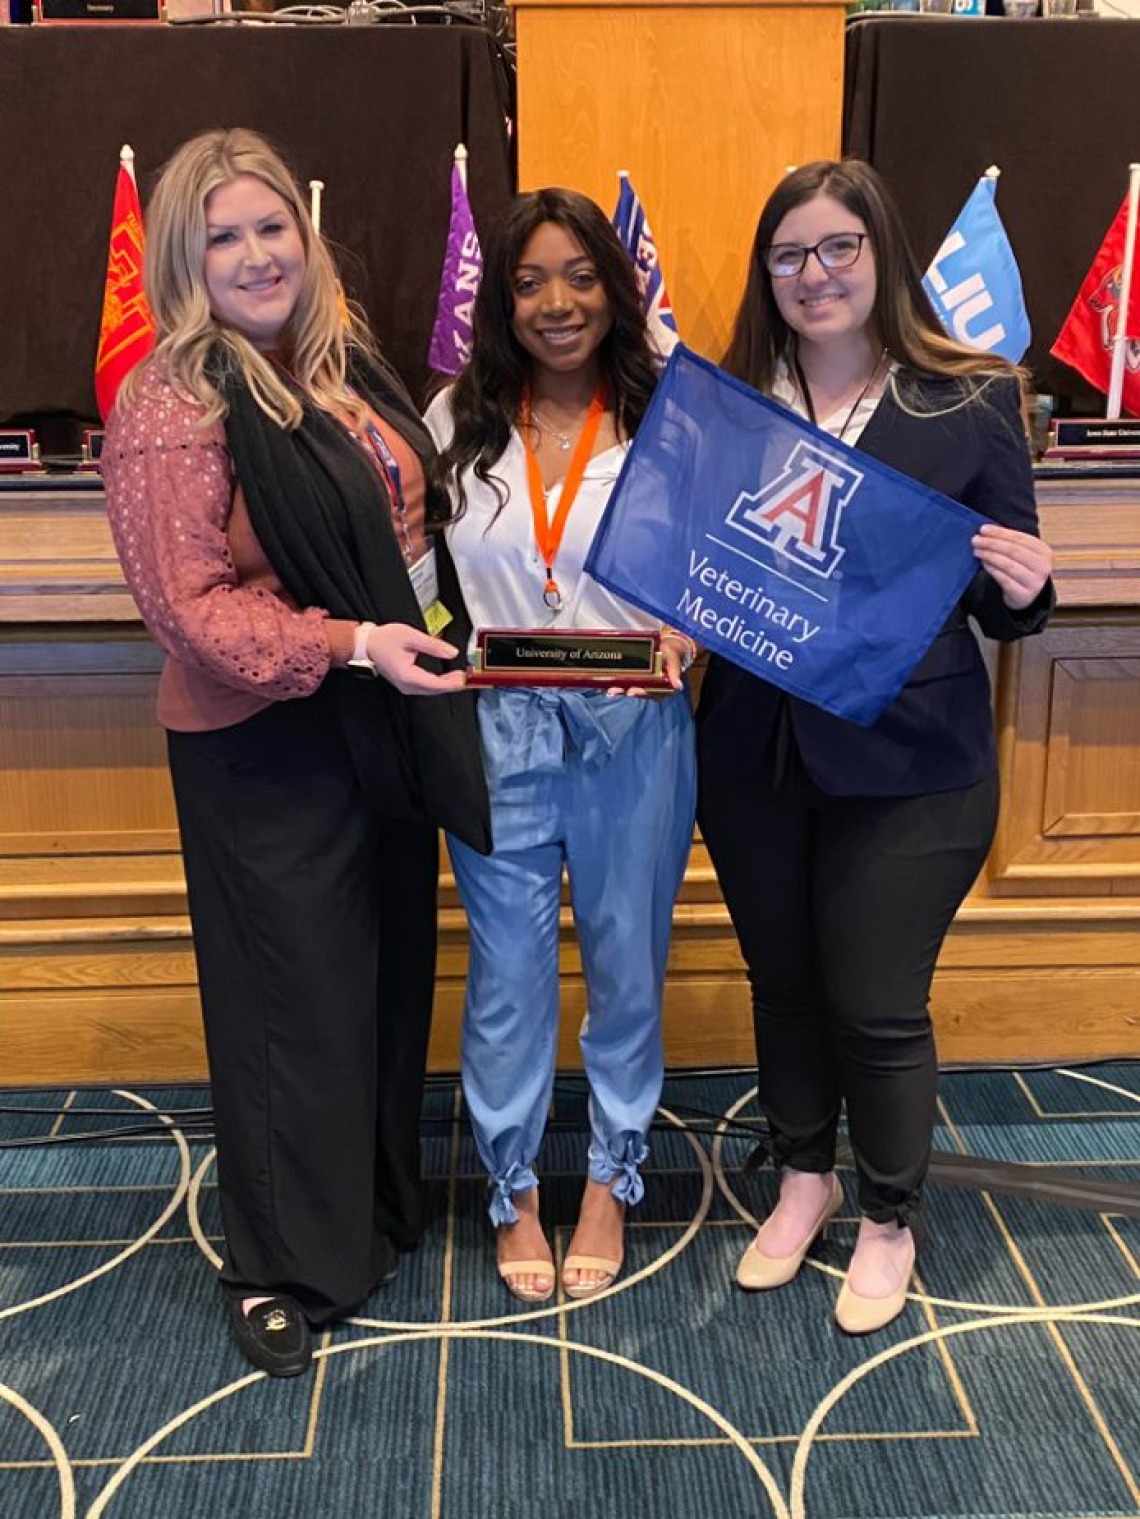 Three veterinary students hold a plaque and flag at a SAVMA event.